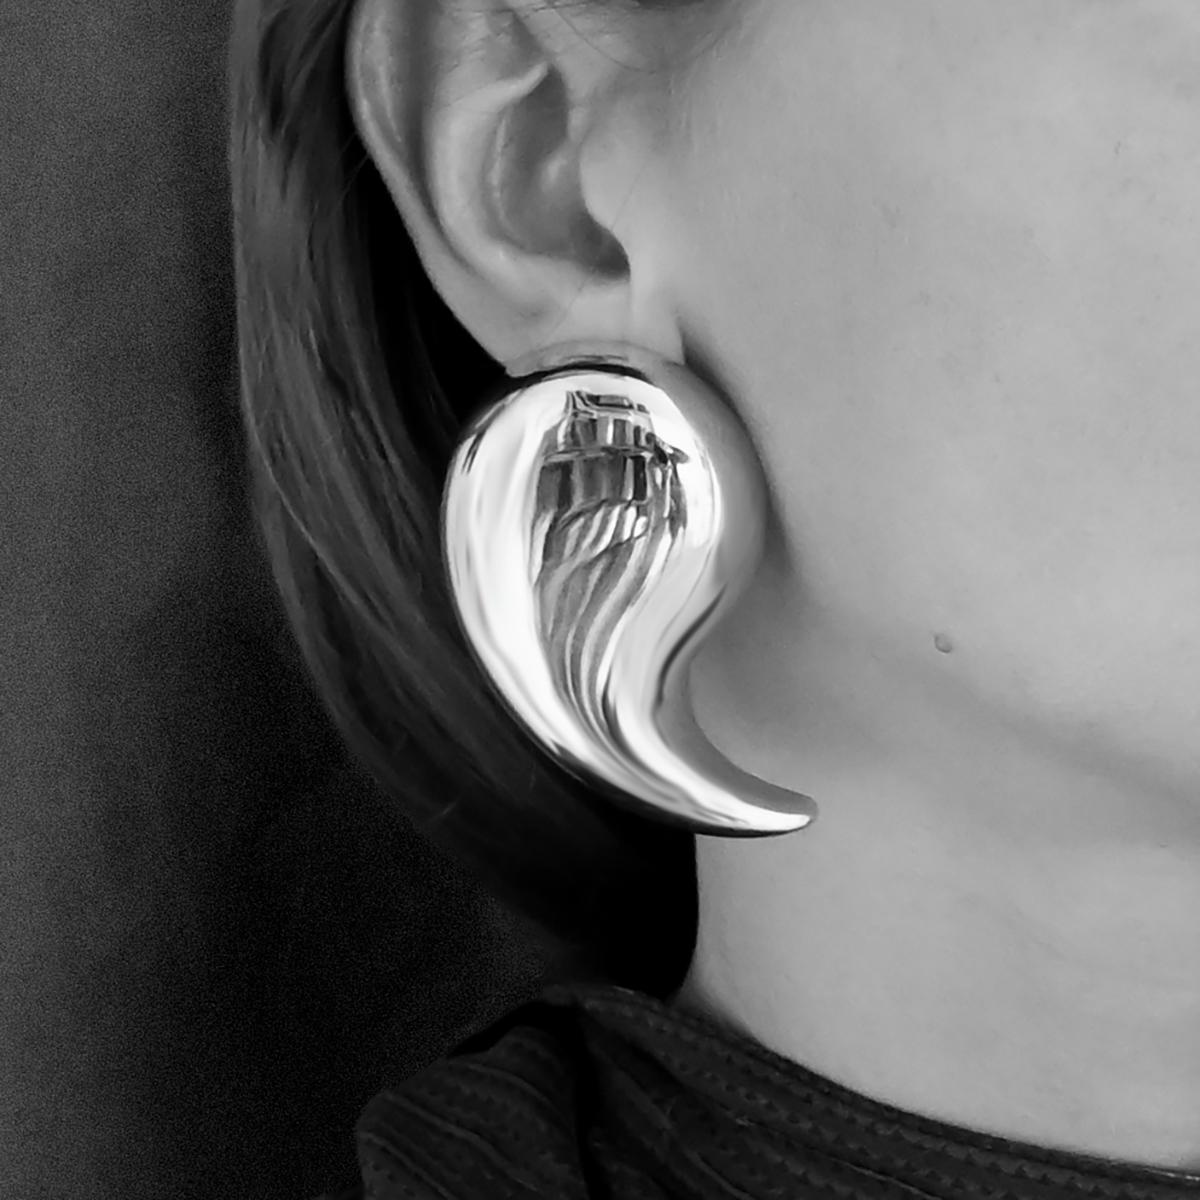 Dream Silver Earrings were inspired by the idea that dreams come to life when we reconnect with our inner essence. They were crafted with a vision to make the world a better place for all, and they serve as daily reminder to keep our dreams bold and